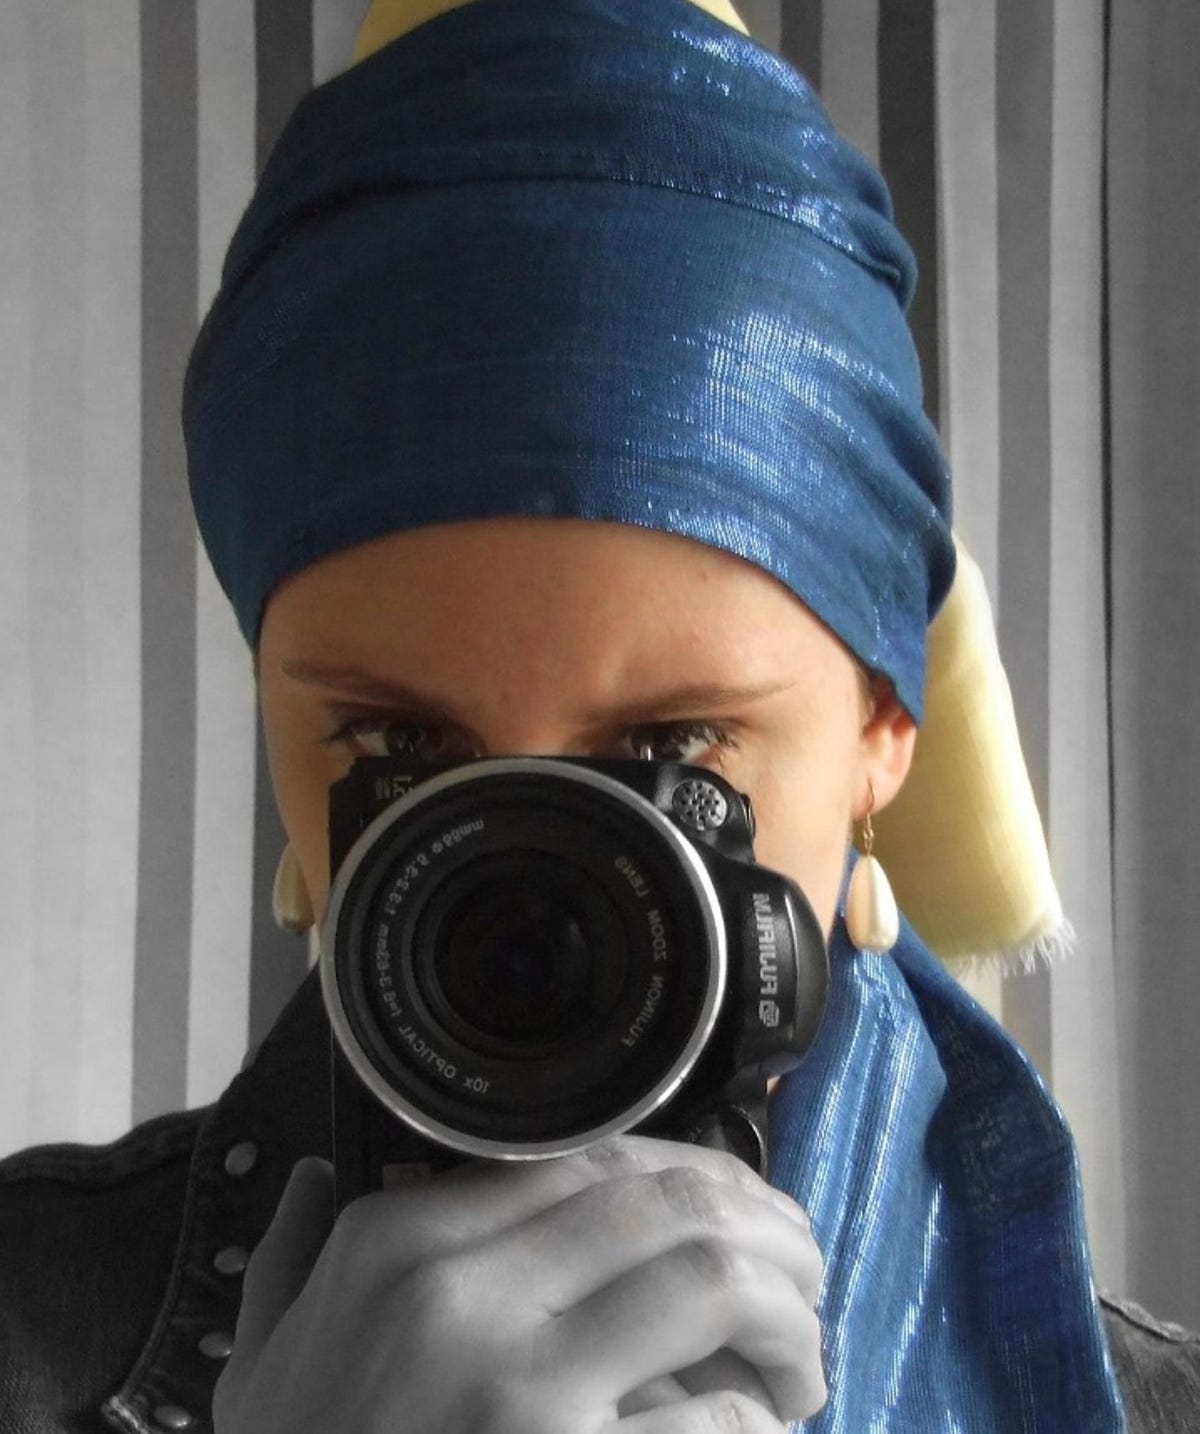 The woman wears a turban and two pearl earrings while holding a camera